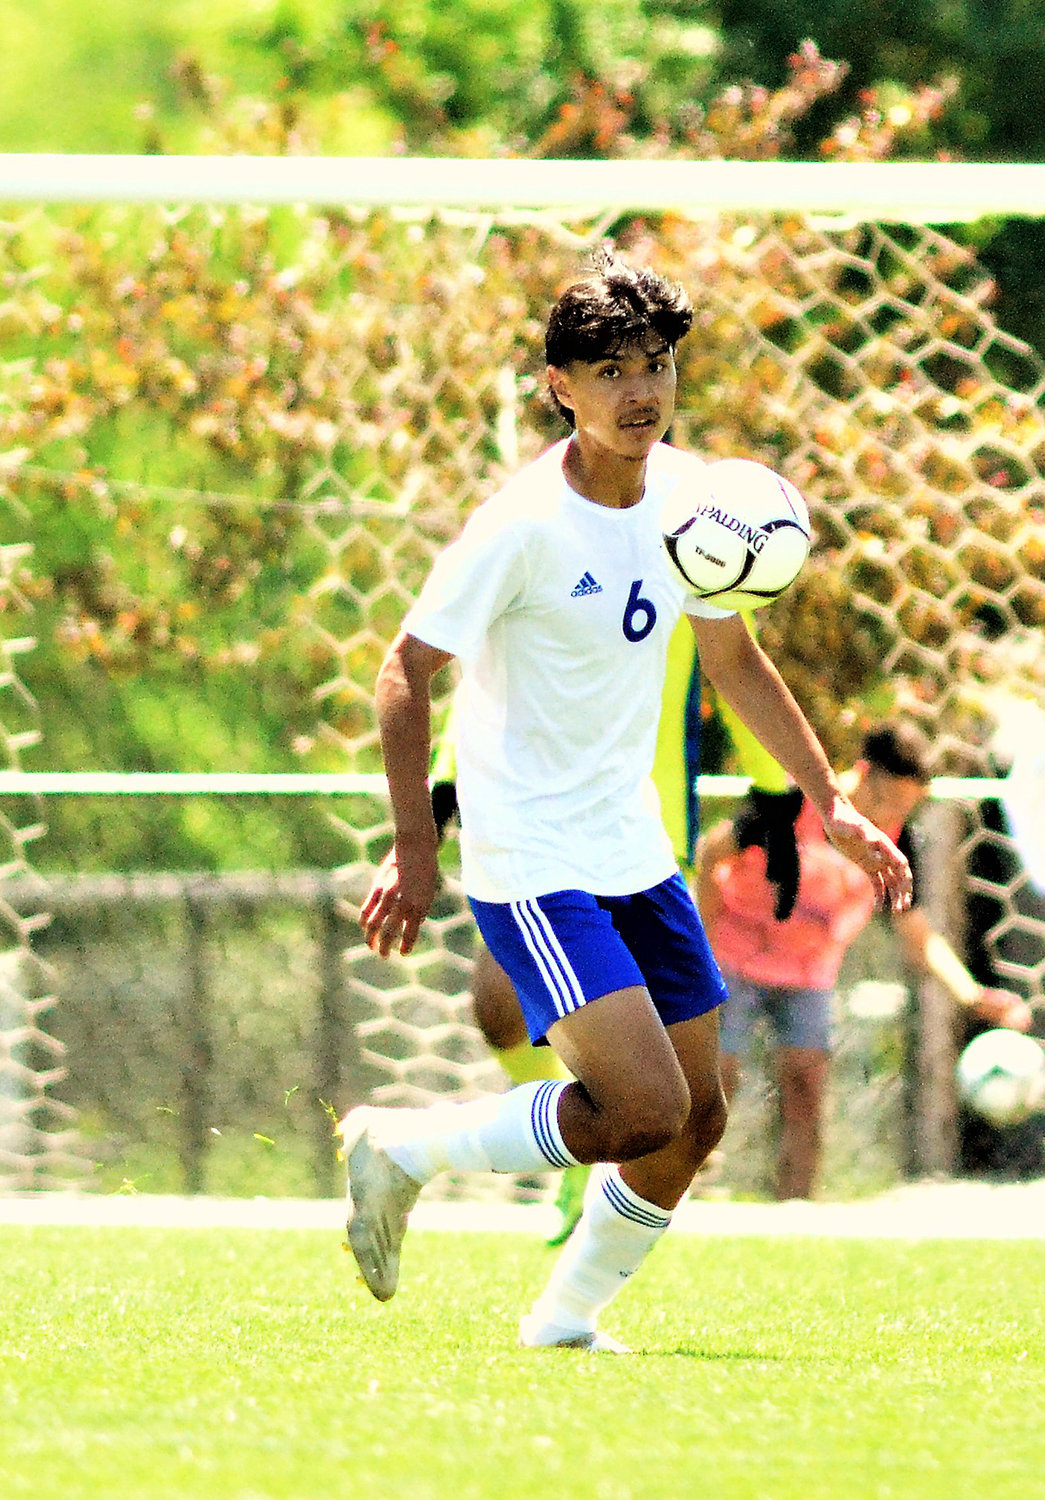 Diego Hernandez returns to the soccer field for his final season at West Liberty.